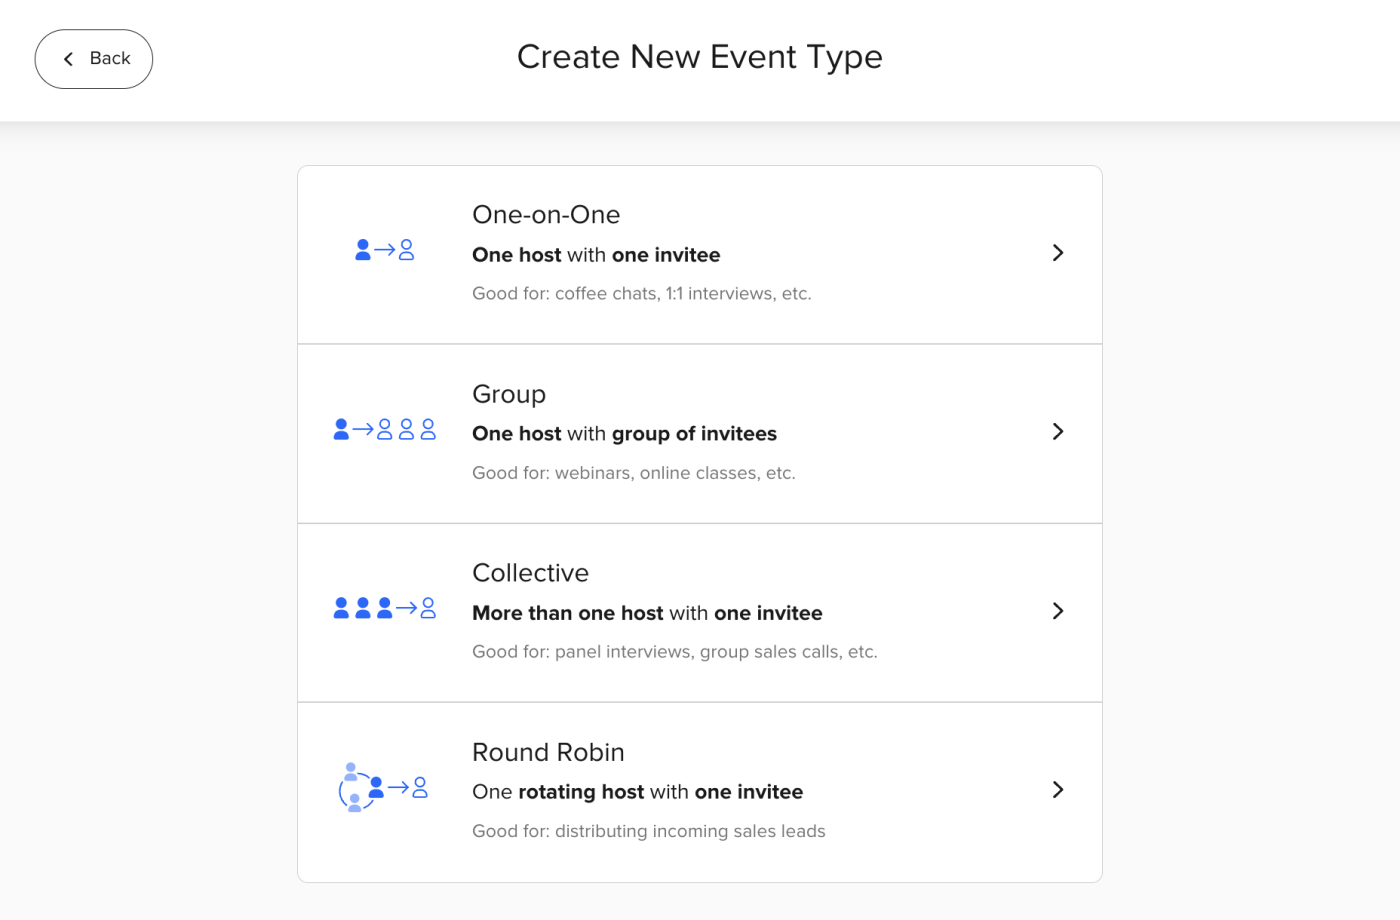 Available Event Types in Calendly.